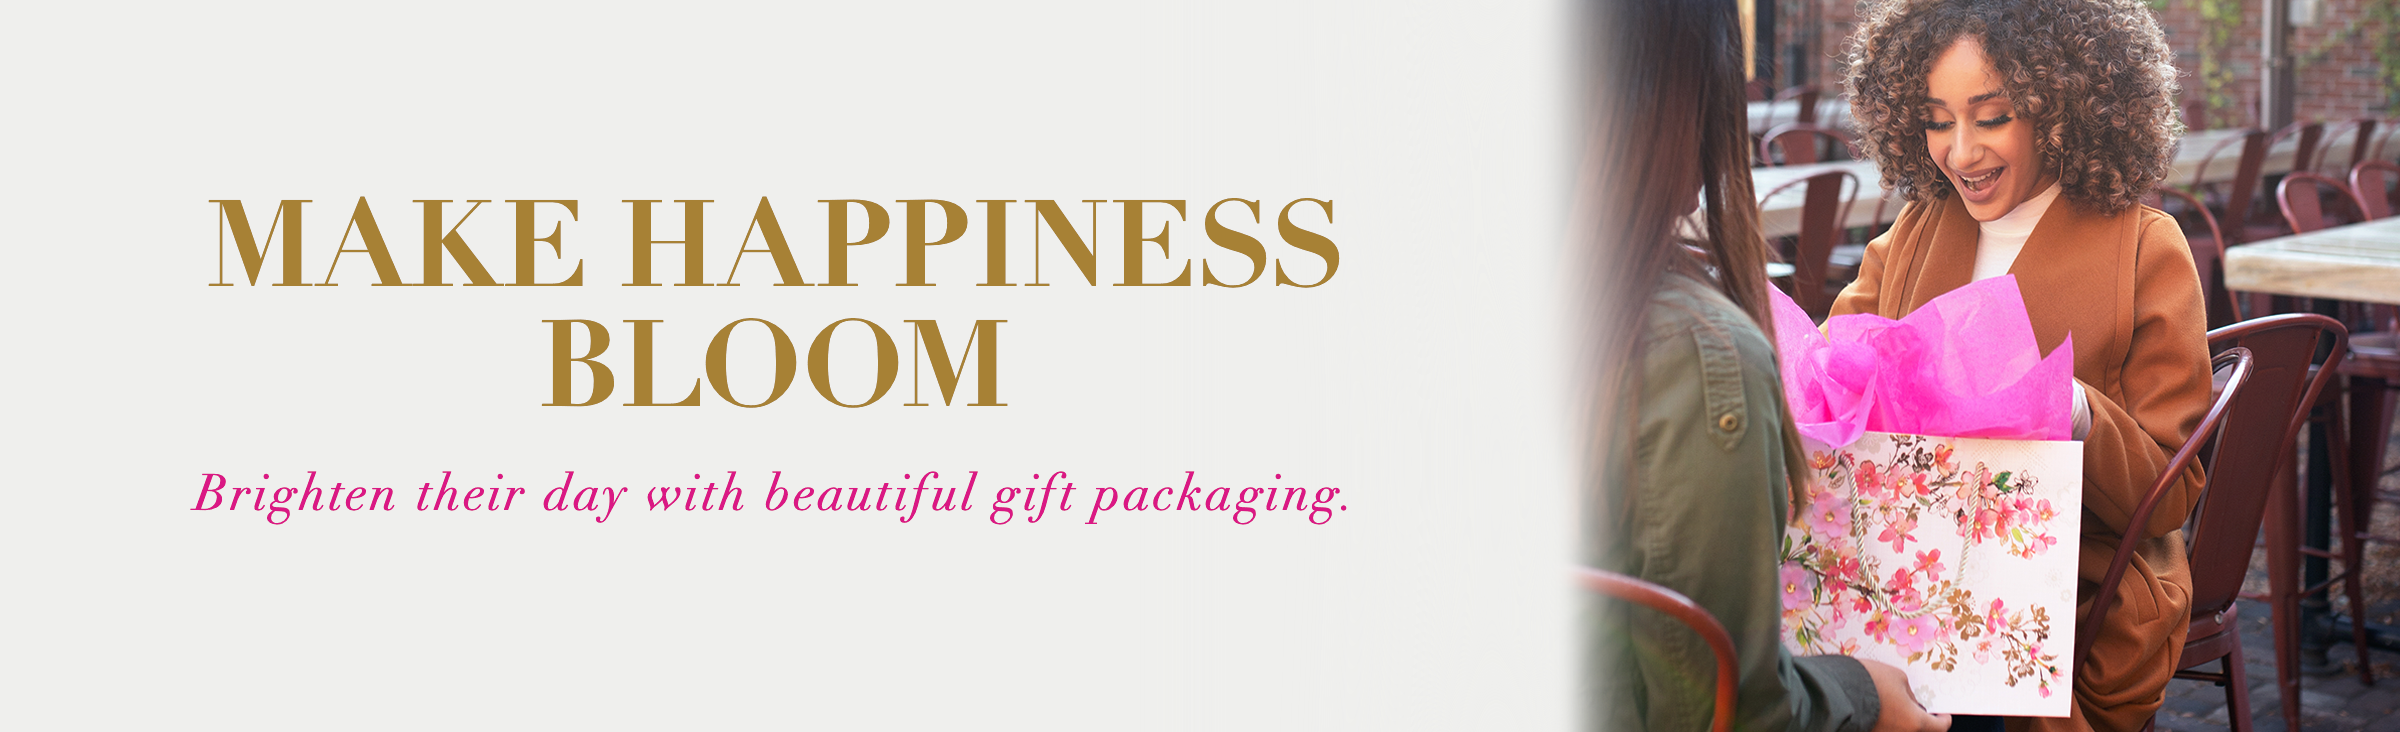 Make happiness bloom Brighten their day with beautiful gift packaging